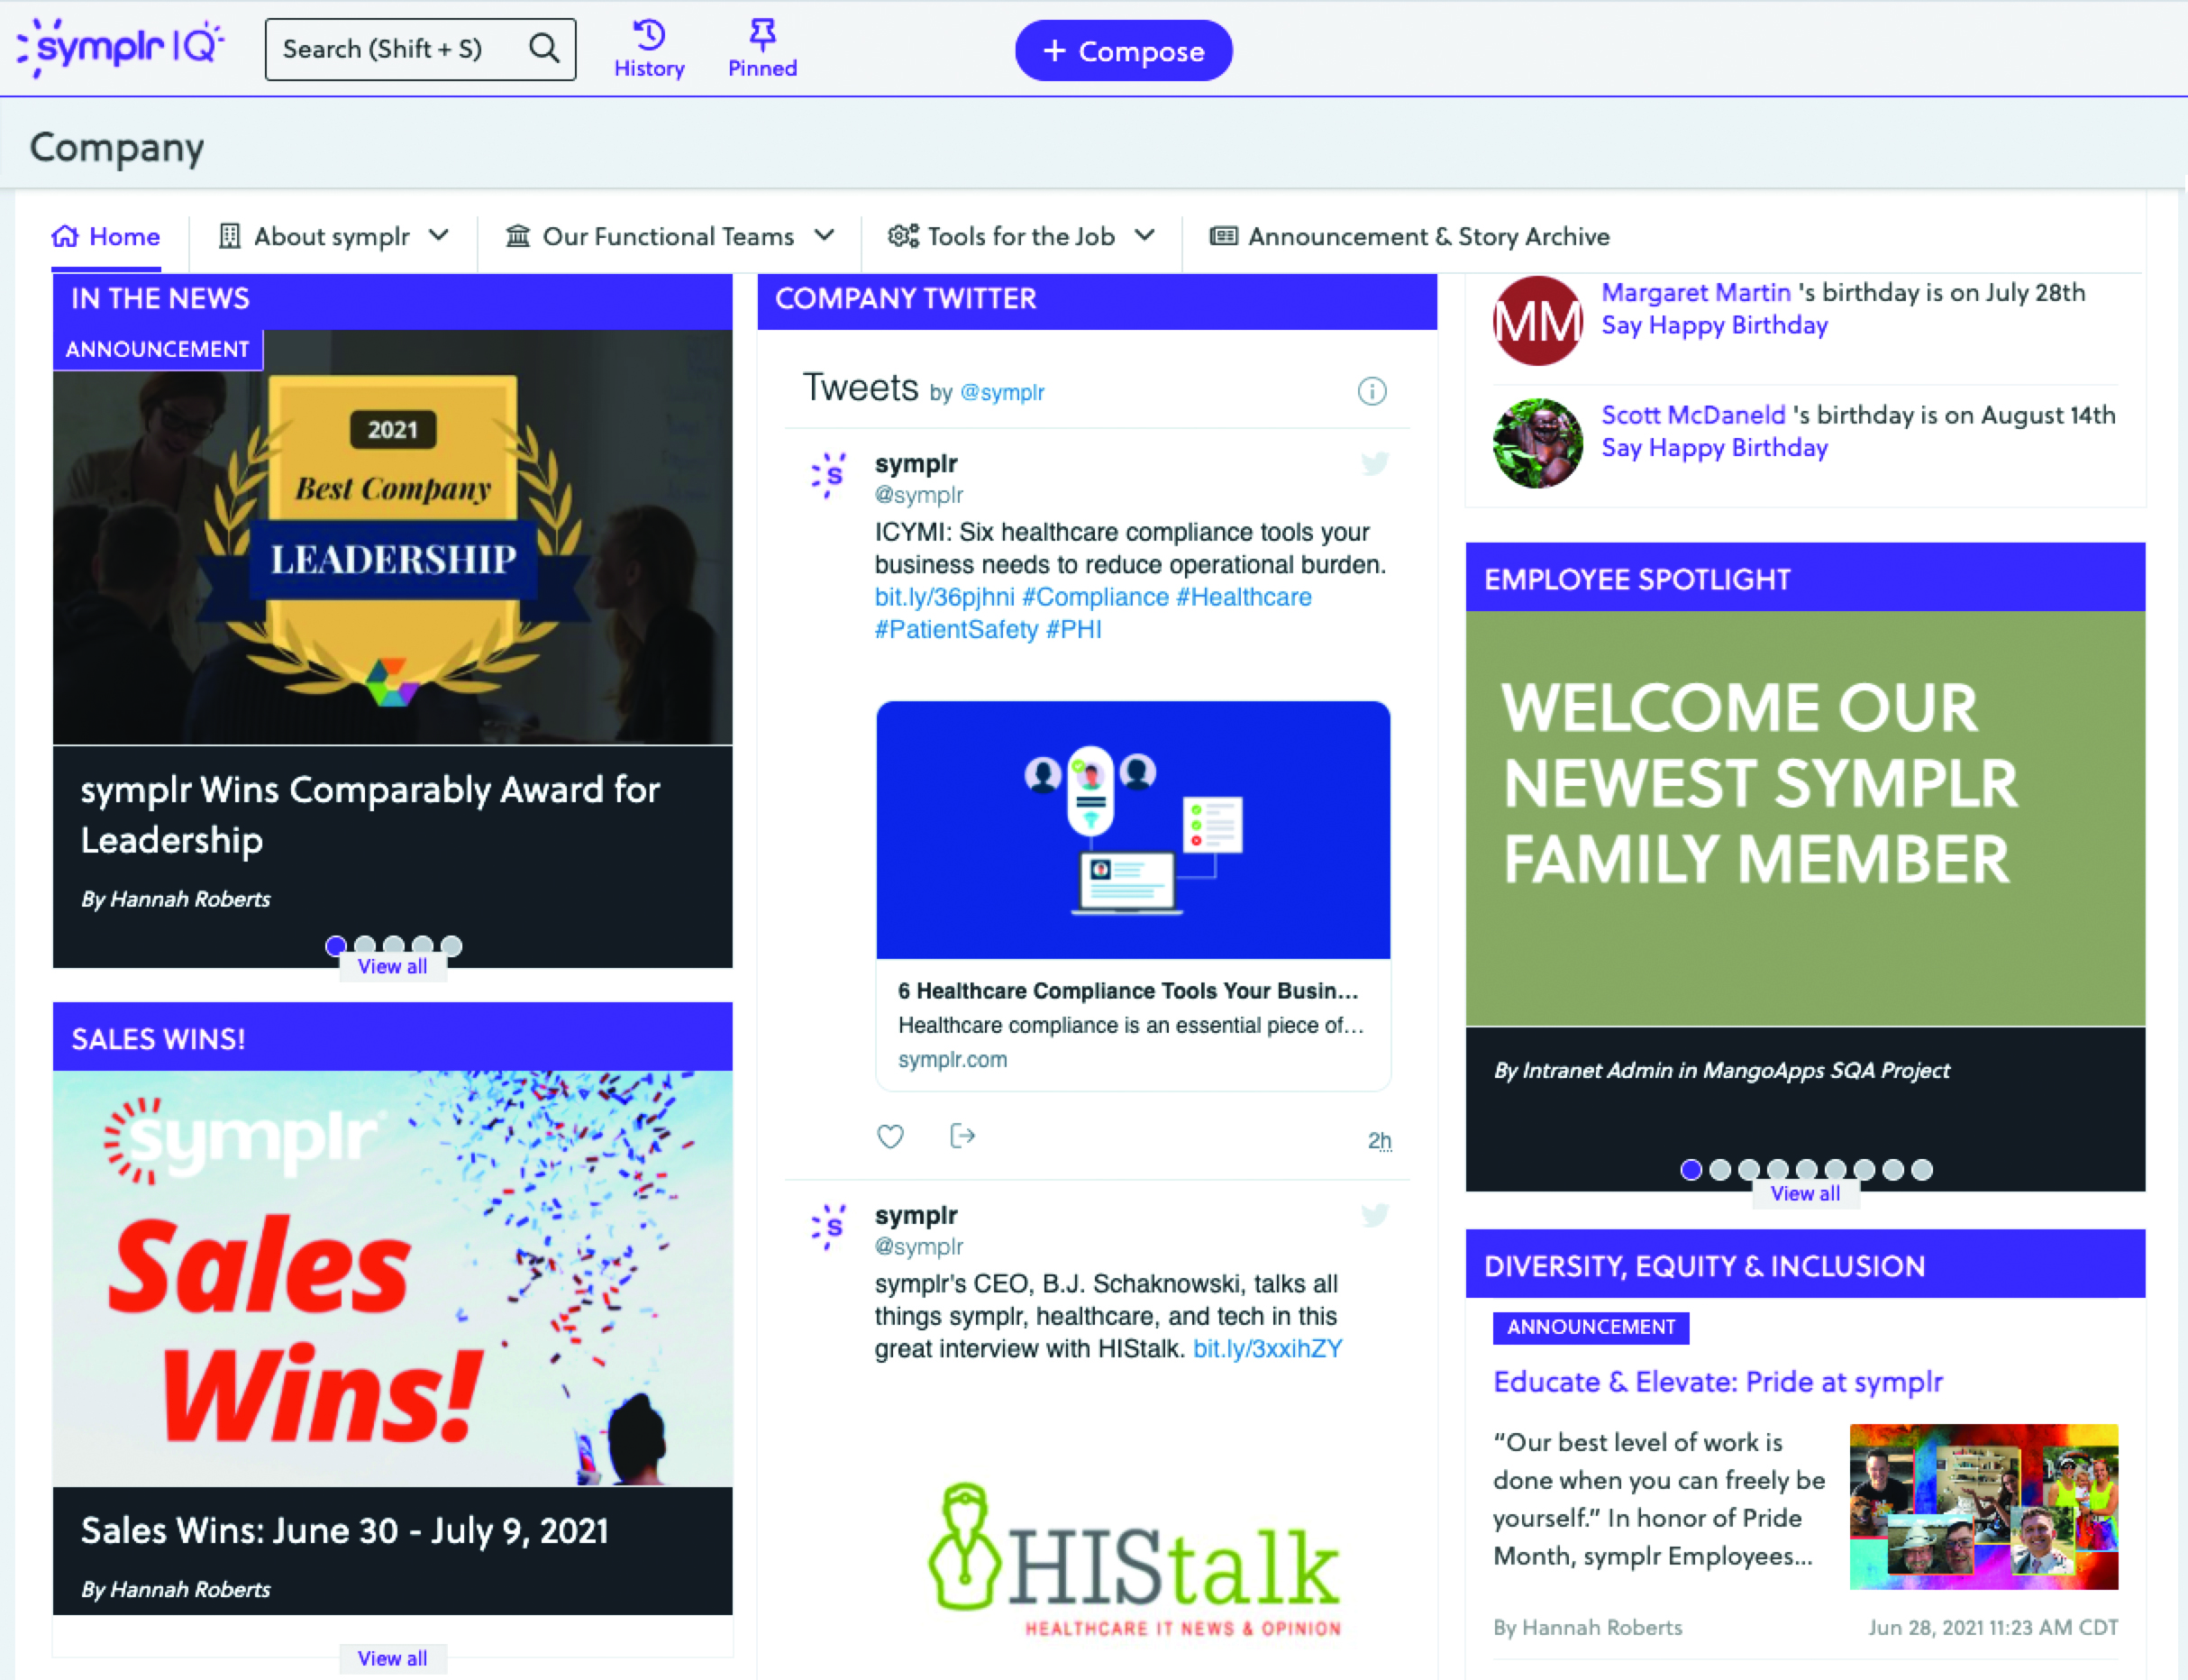 symplr's intranet home page and news feed